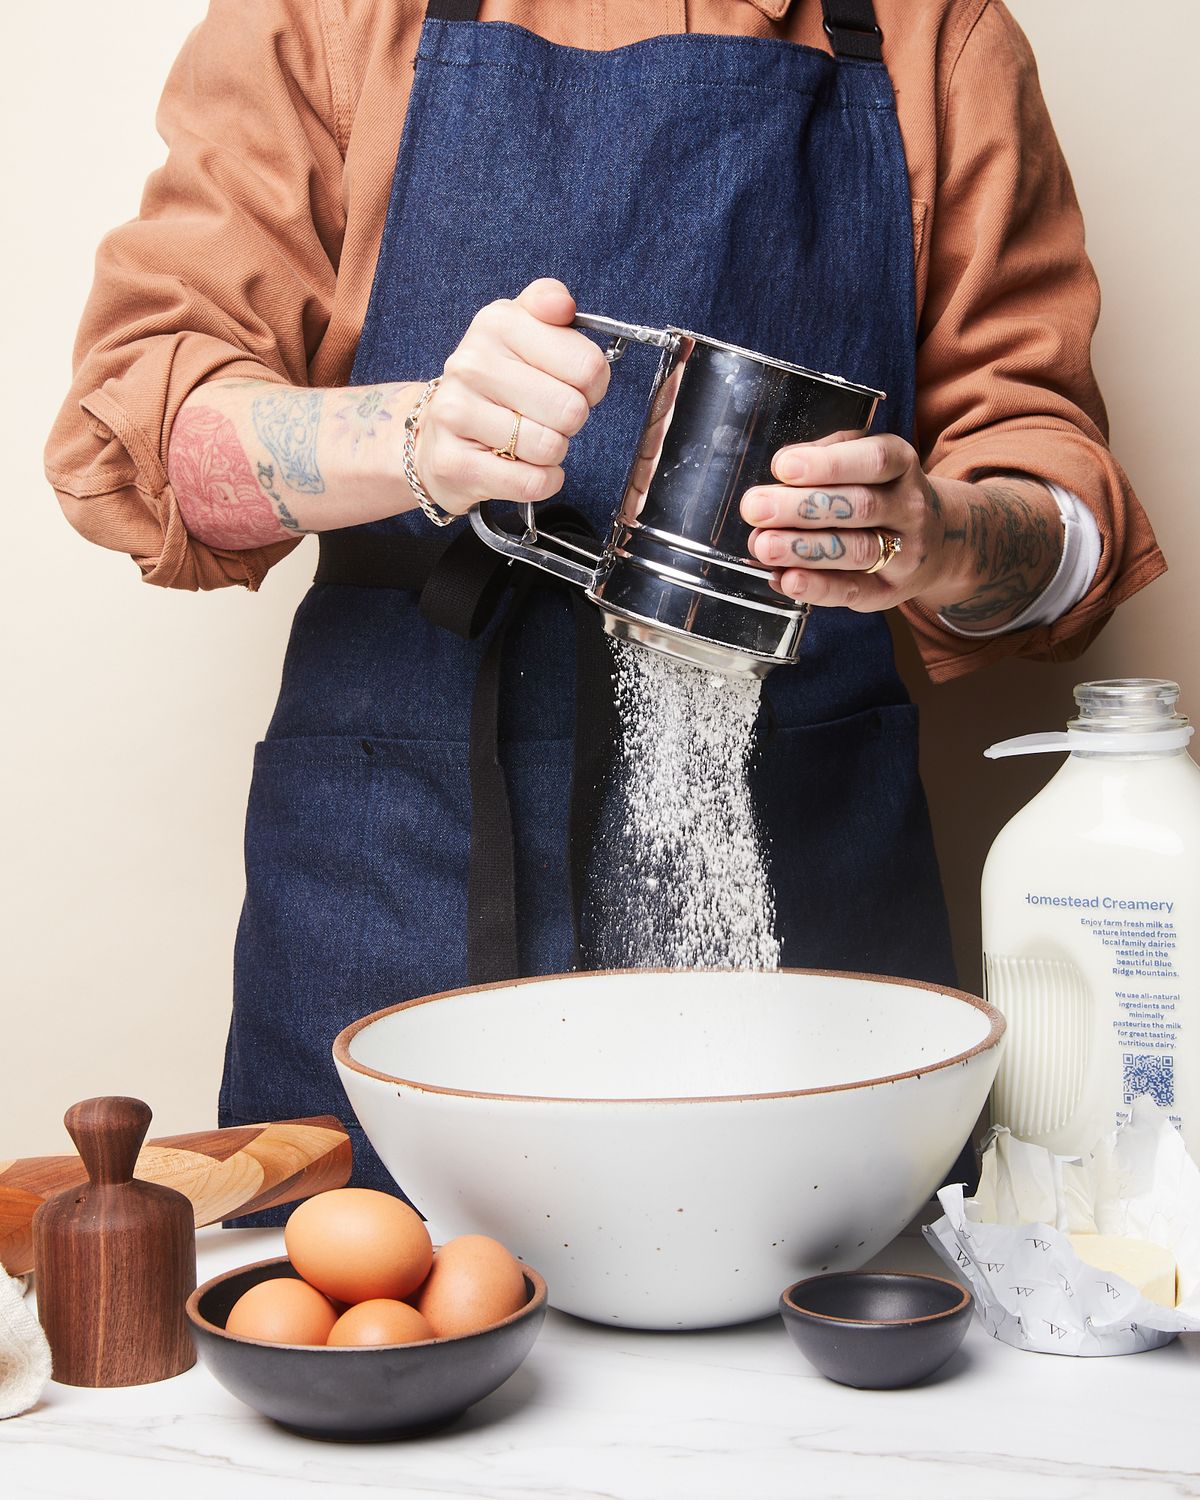 A person wearing a denim apron and holding a flour sifter over a mixing bowl. Surrounded are a biscuit cutter, a bowl with eggs, a carton of milk, opened stick of butter, and a bitty bowl.